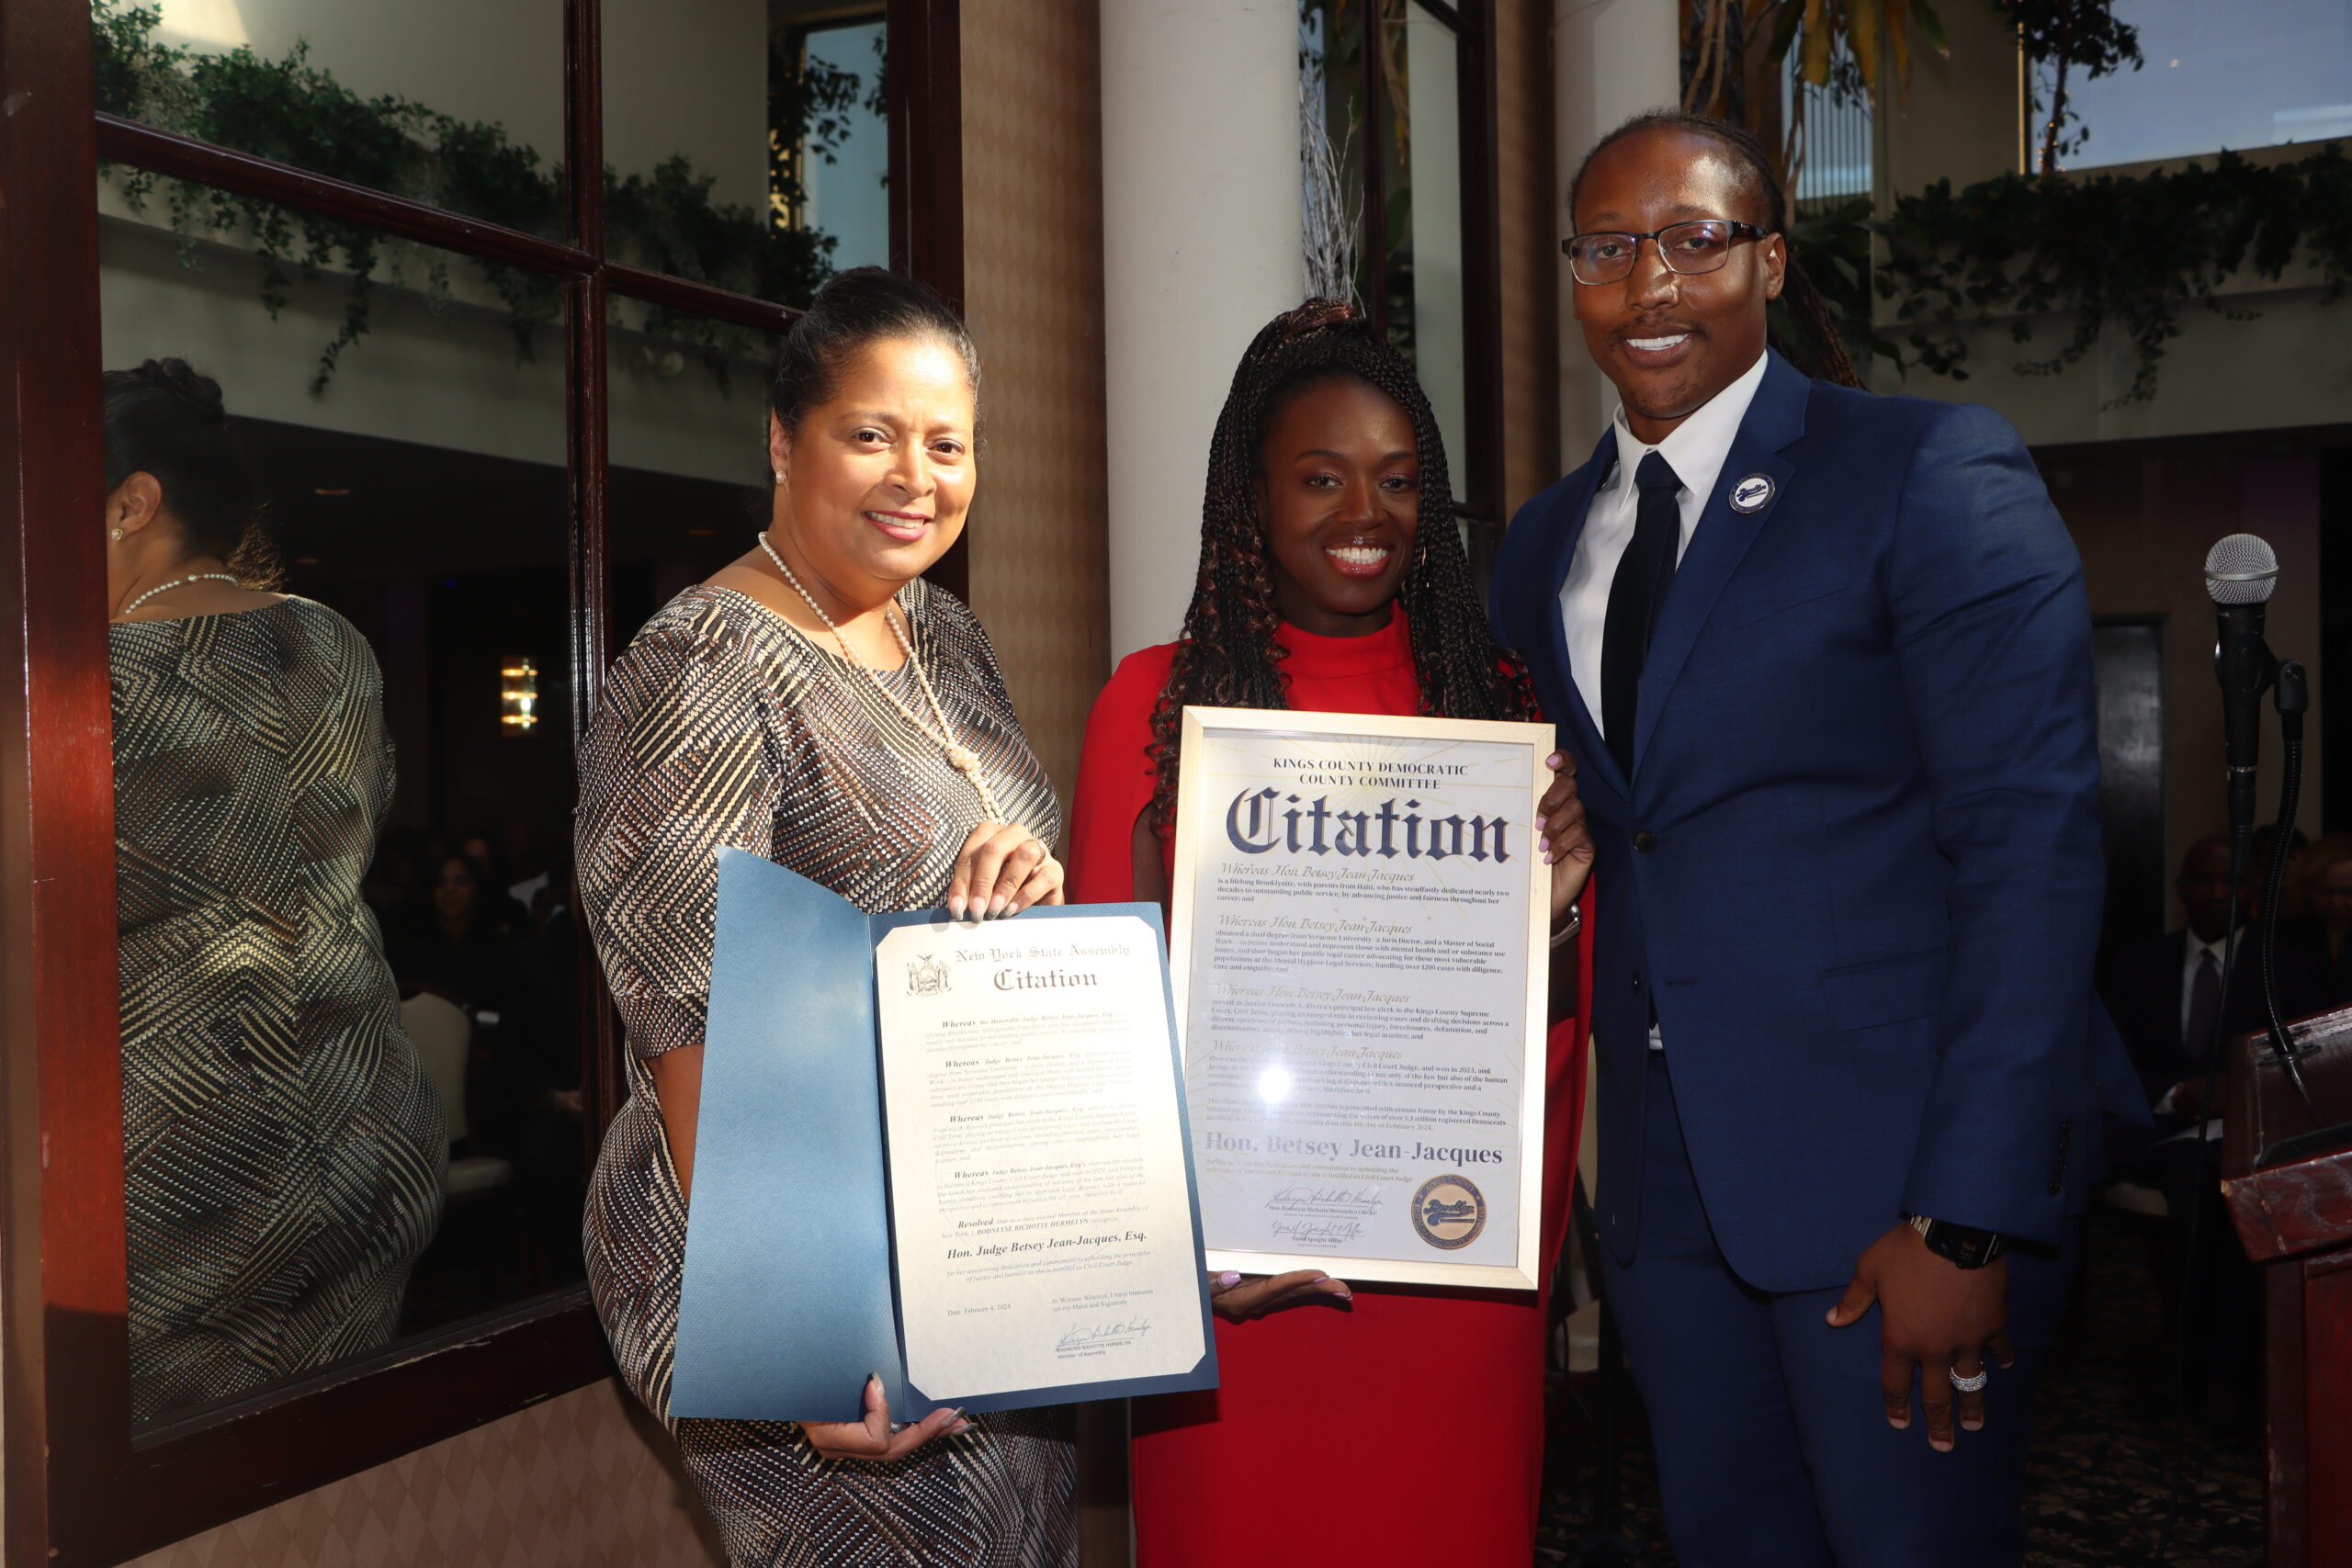 Arleny Alvarado-McCalla and Yamil Speight-Miller honor Judge Jean-Jacques with citations, celebrating her achievements and contributions to the community.